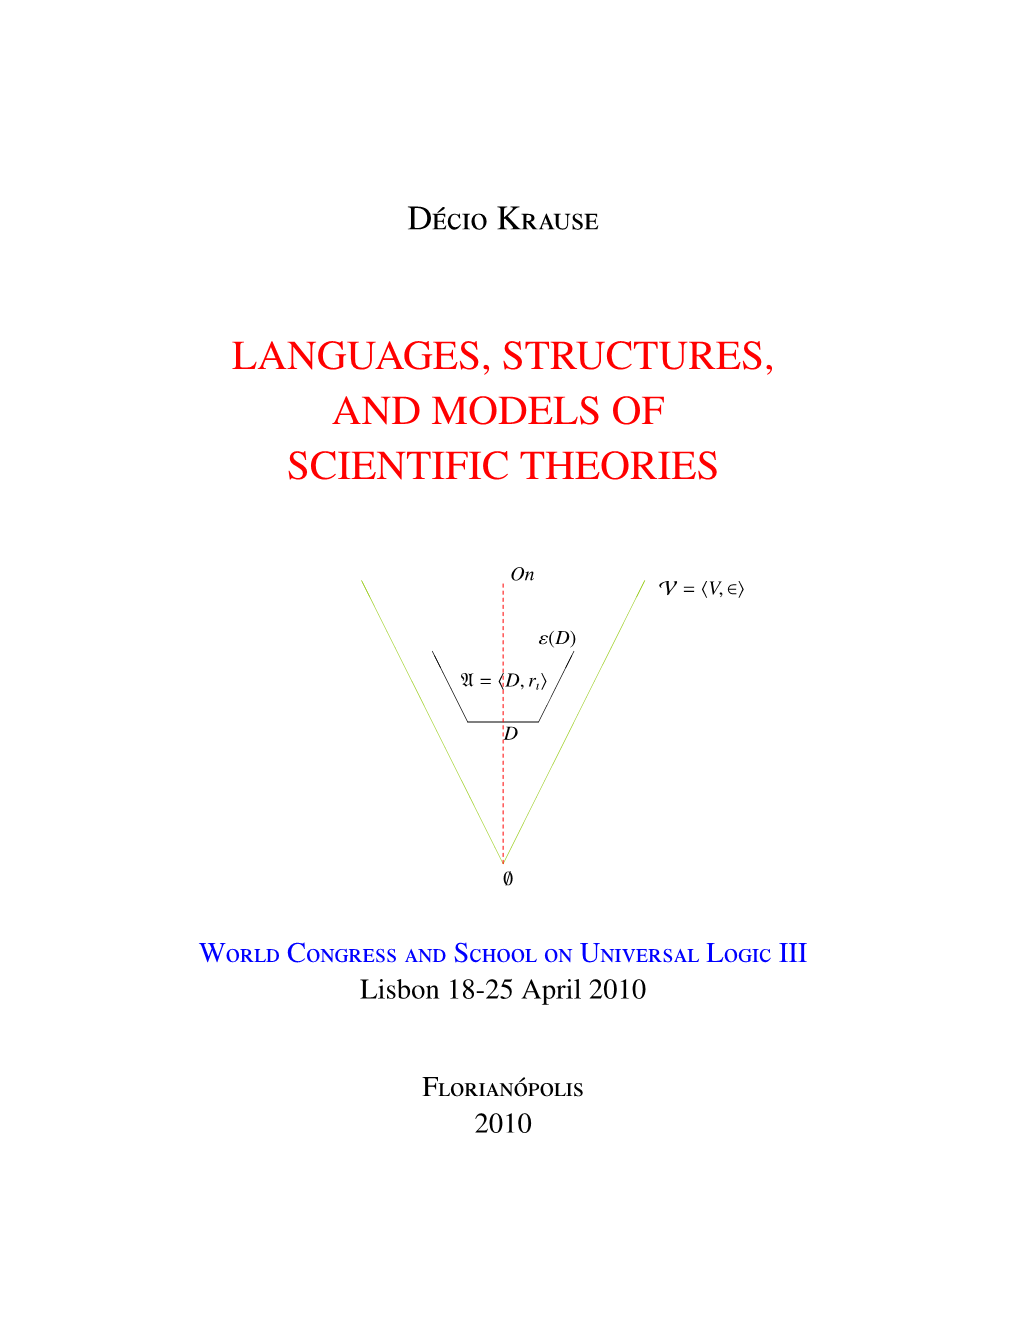 Languages, Structures, and Models of Scientific Theories